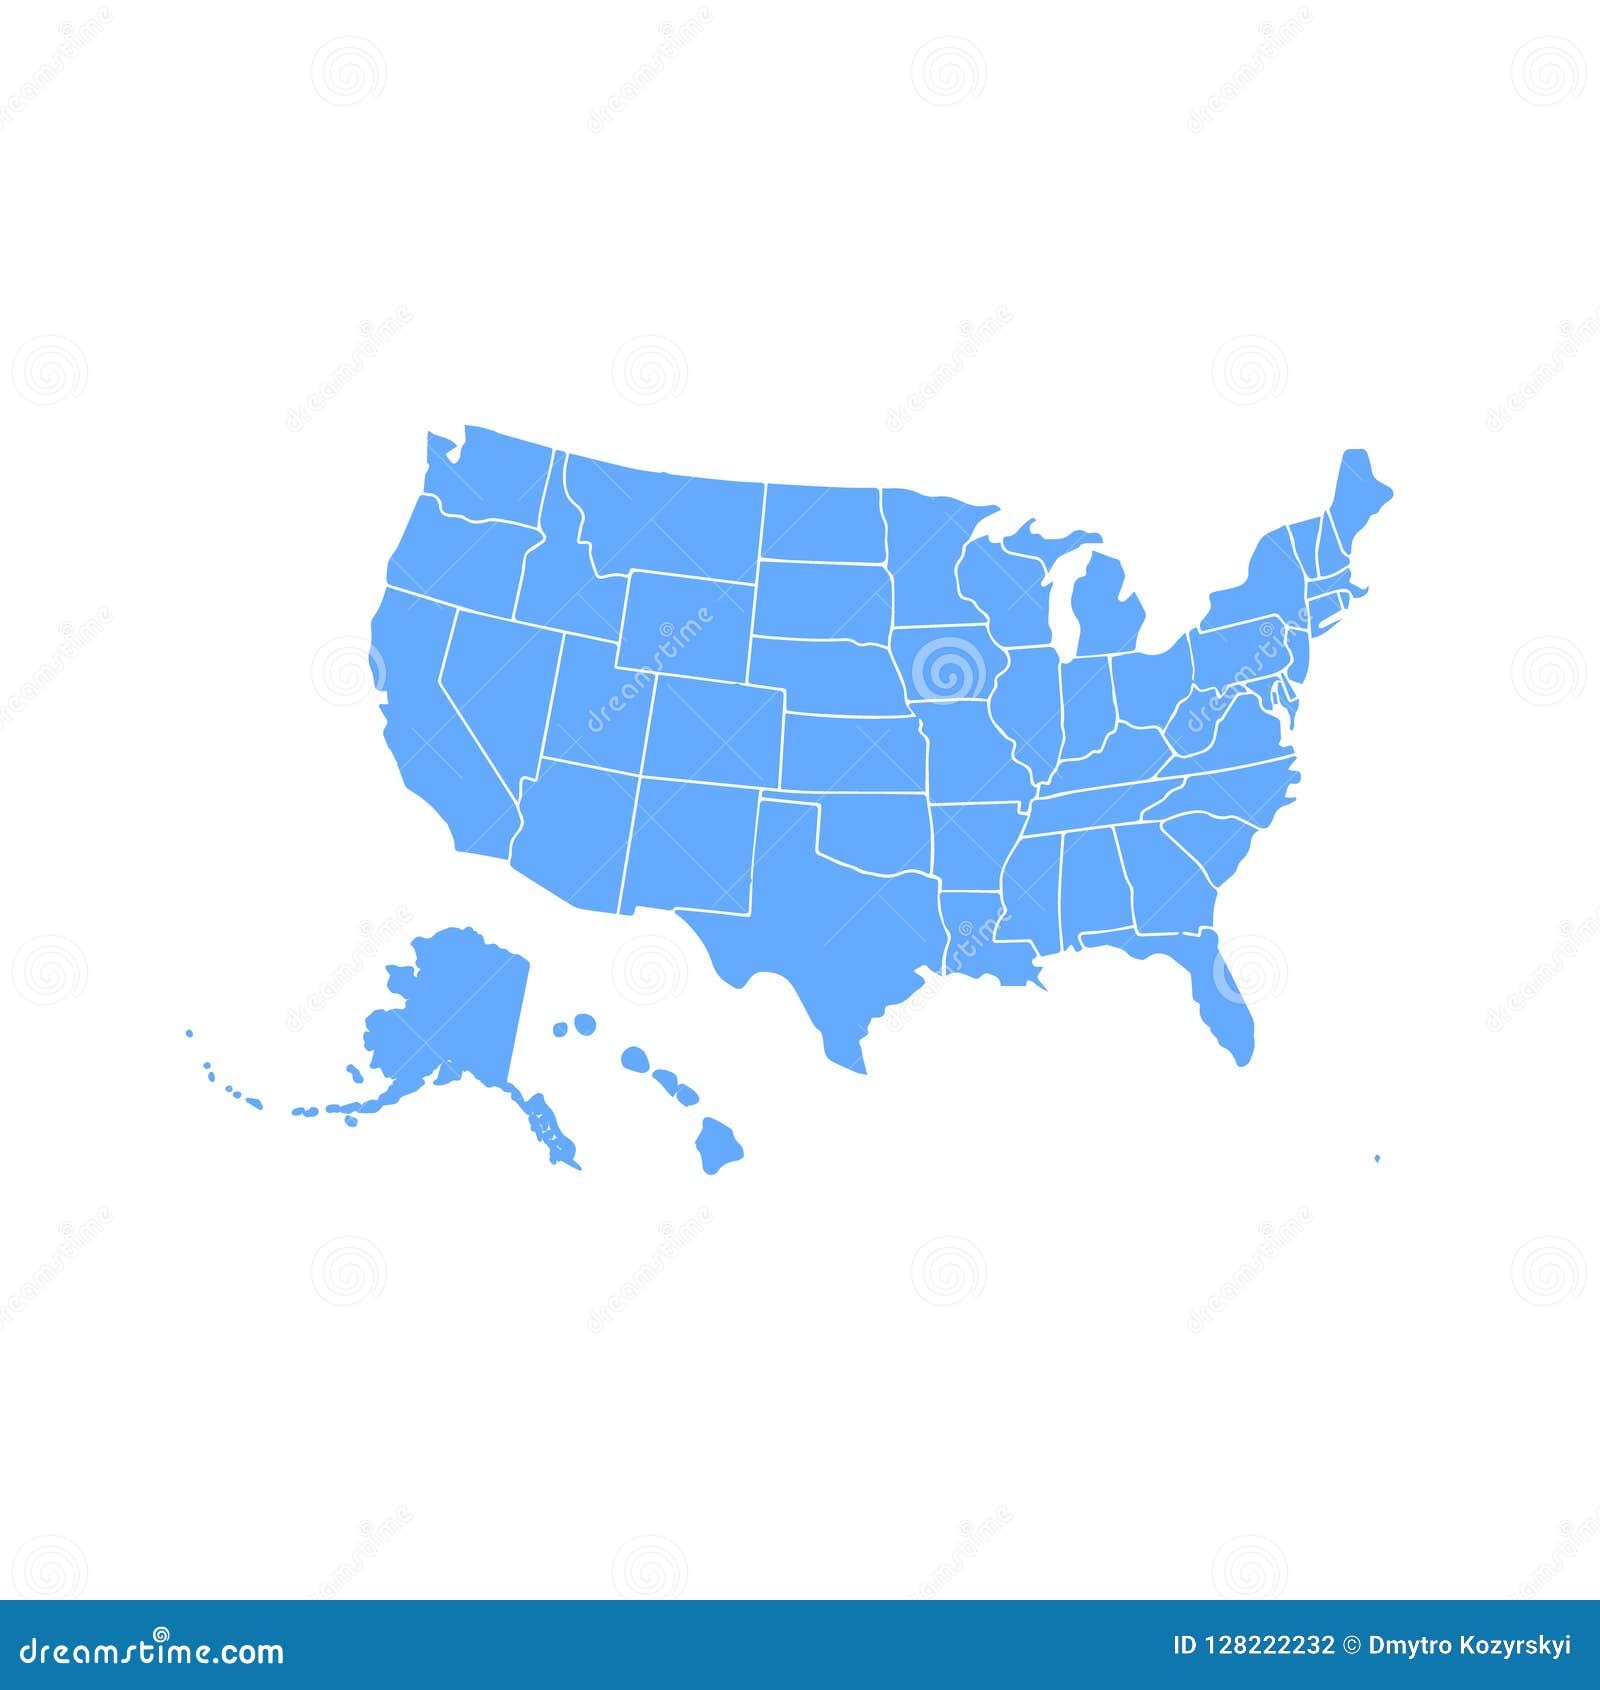 blank similar usa map  on white background. united states of america country.  template for website